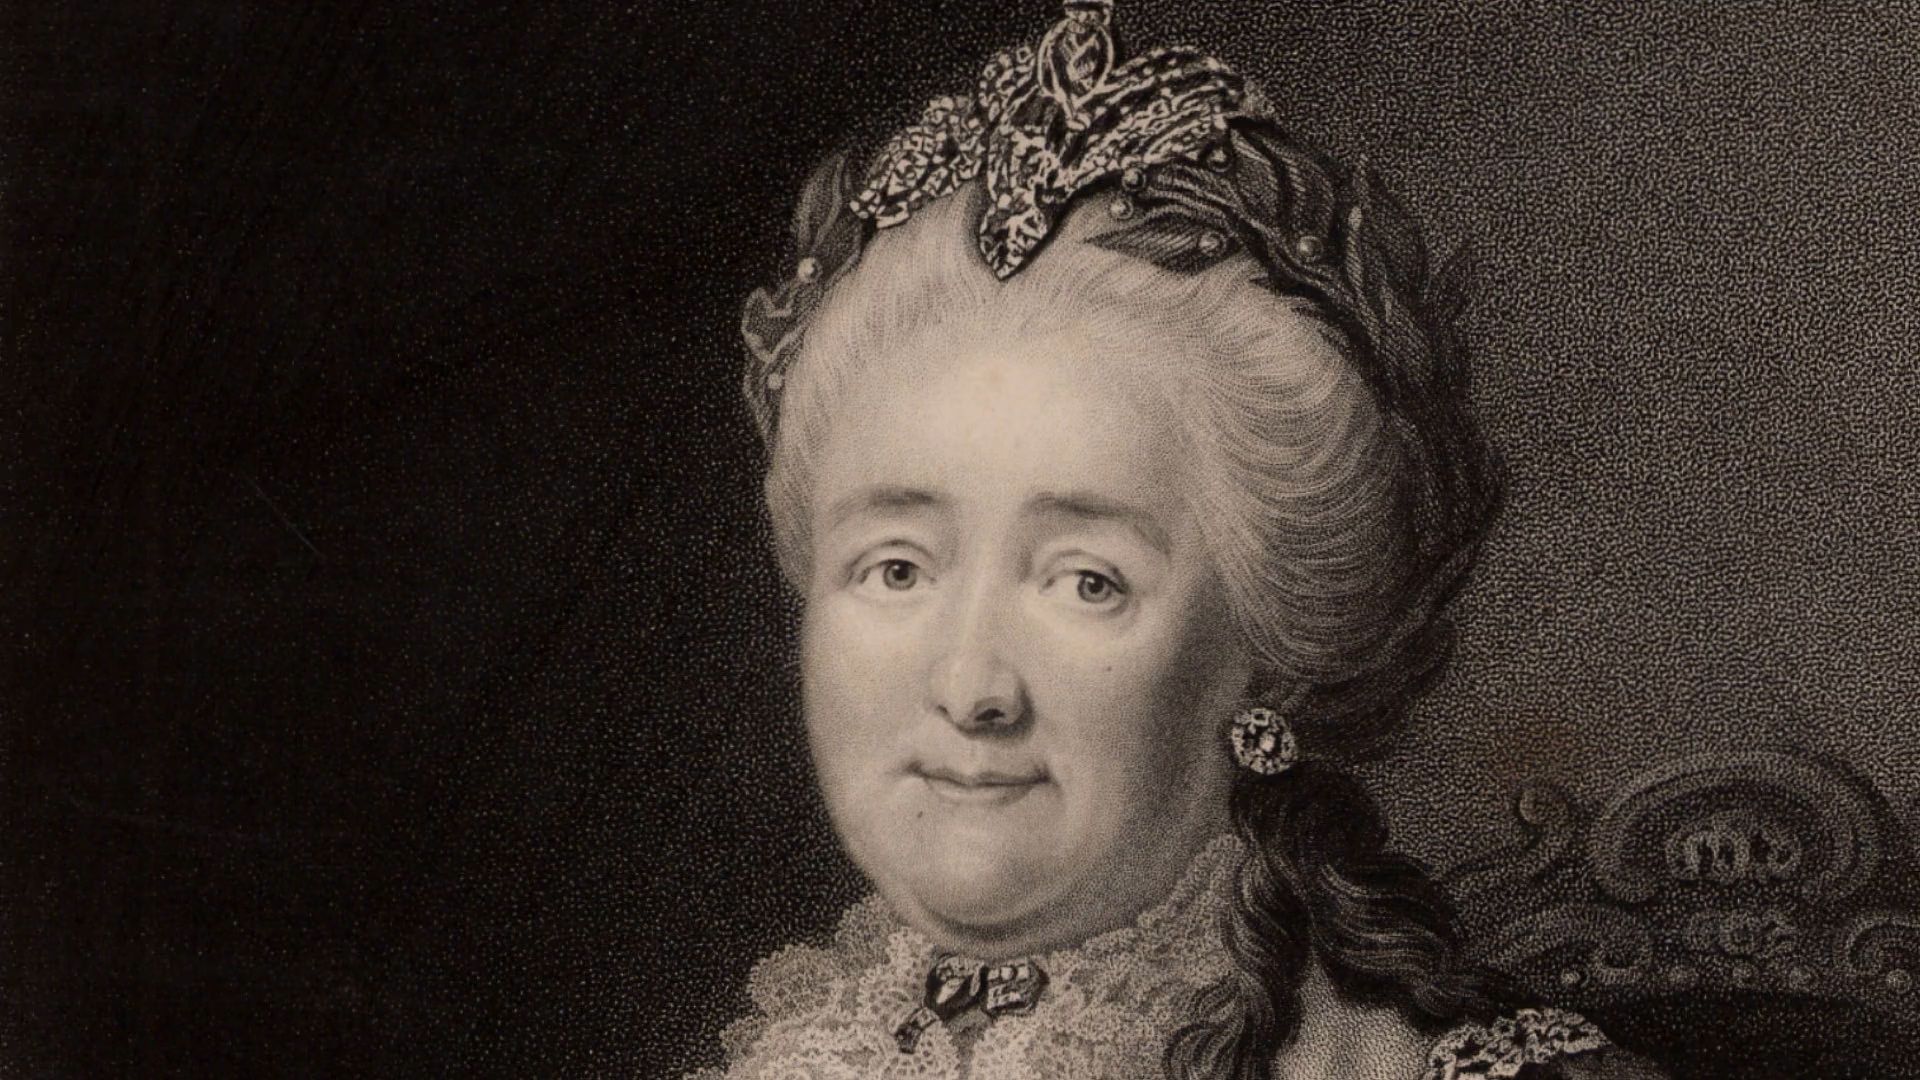 Debunking the myths around Catherine the Great